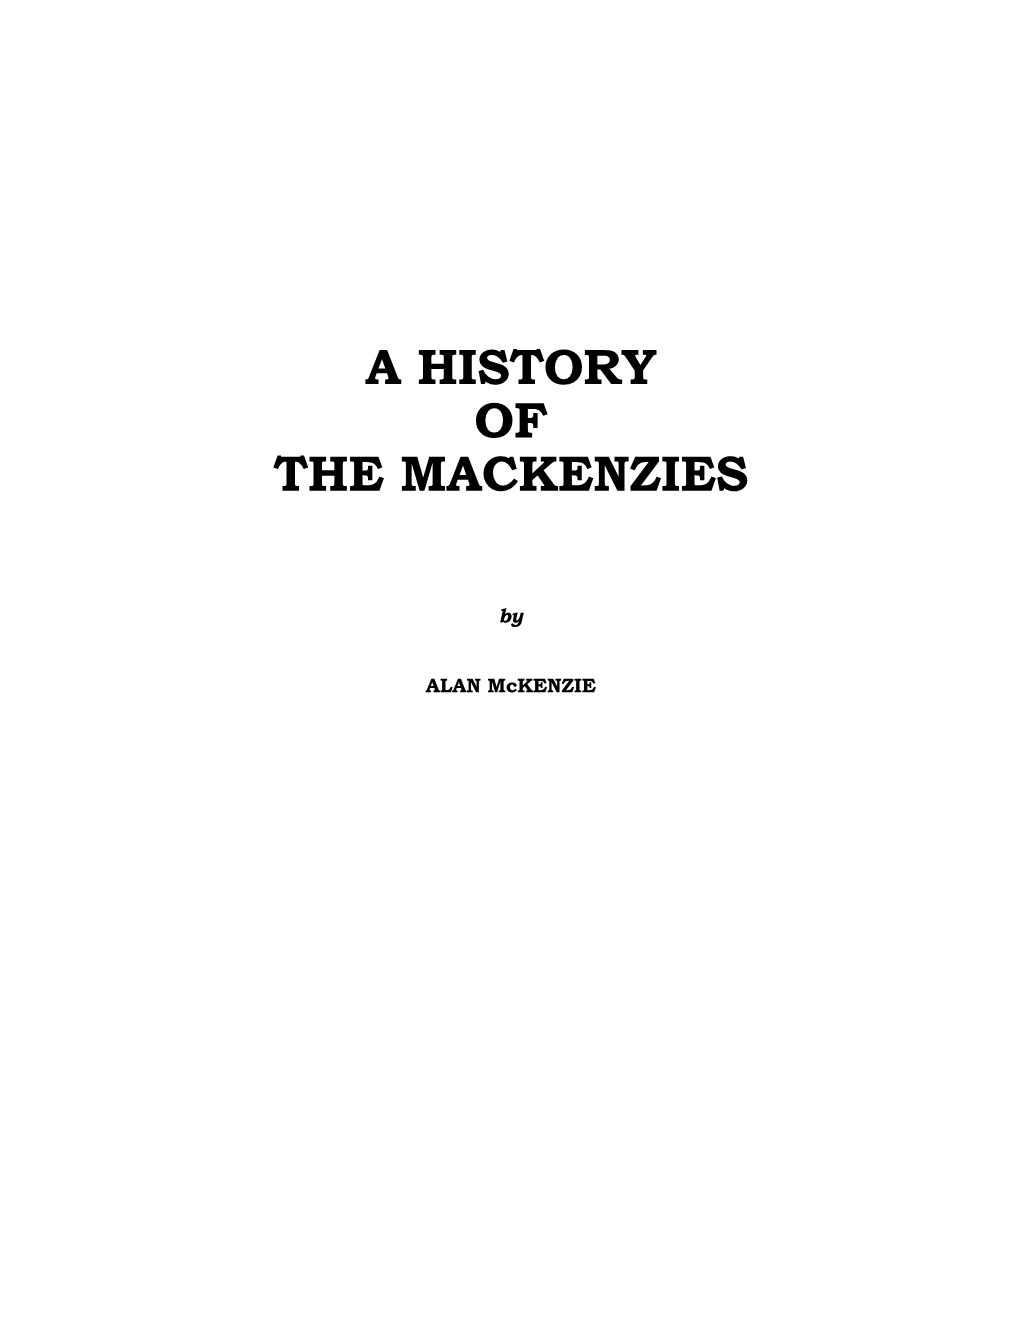 A History of the Mackenzies